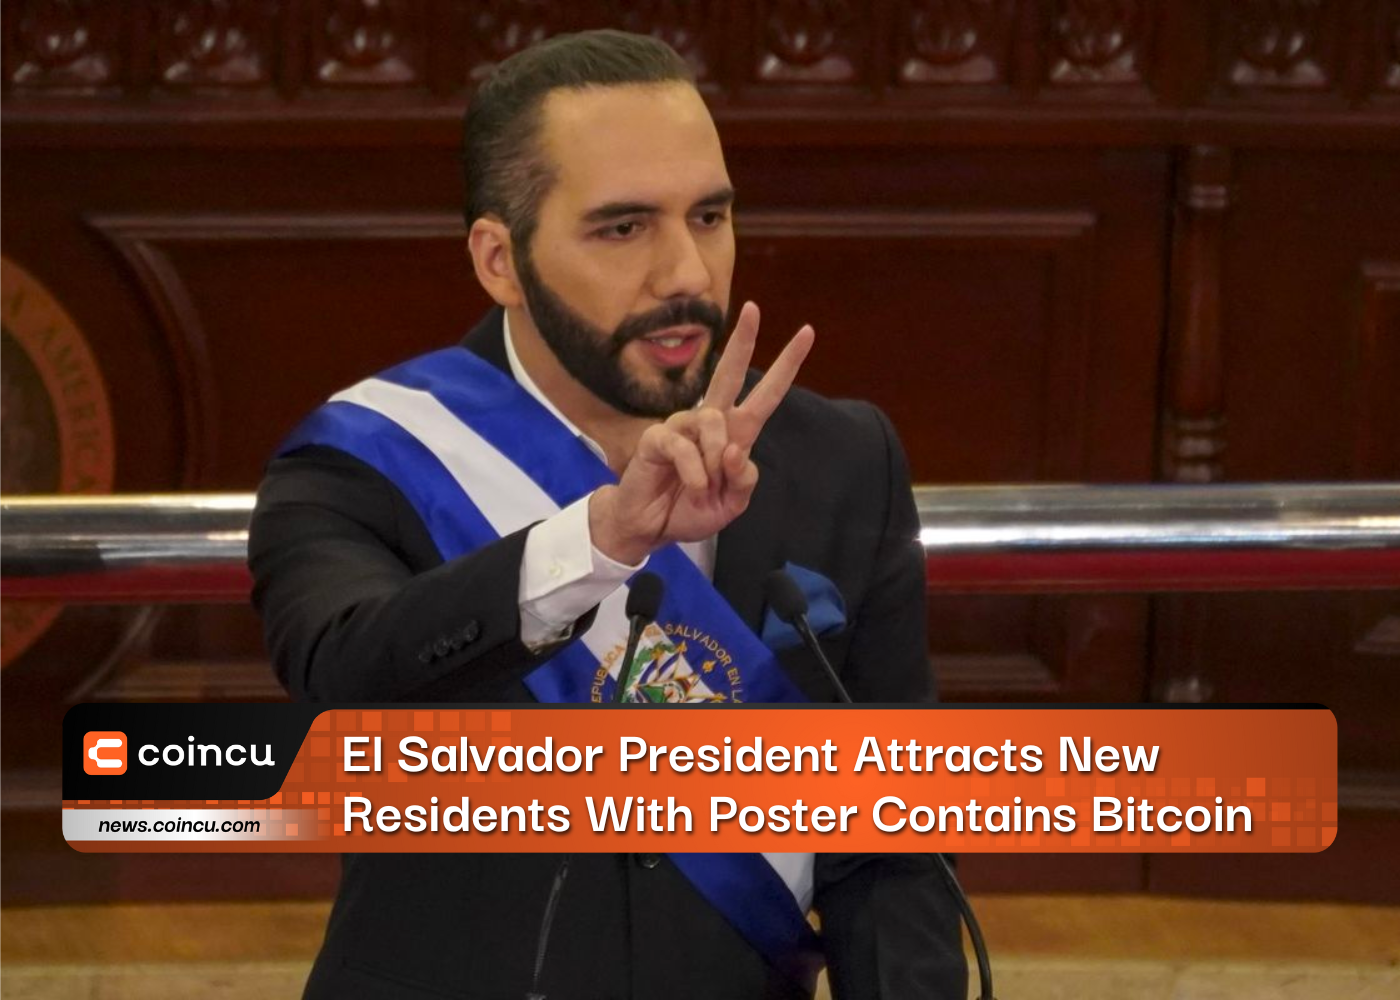 El Salvador President Attracts New Residents With Poster Contains Bitcoin